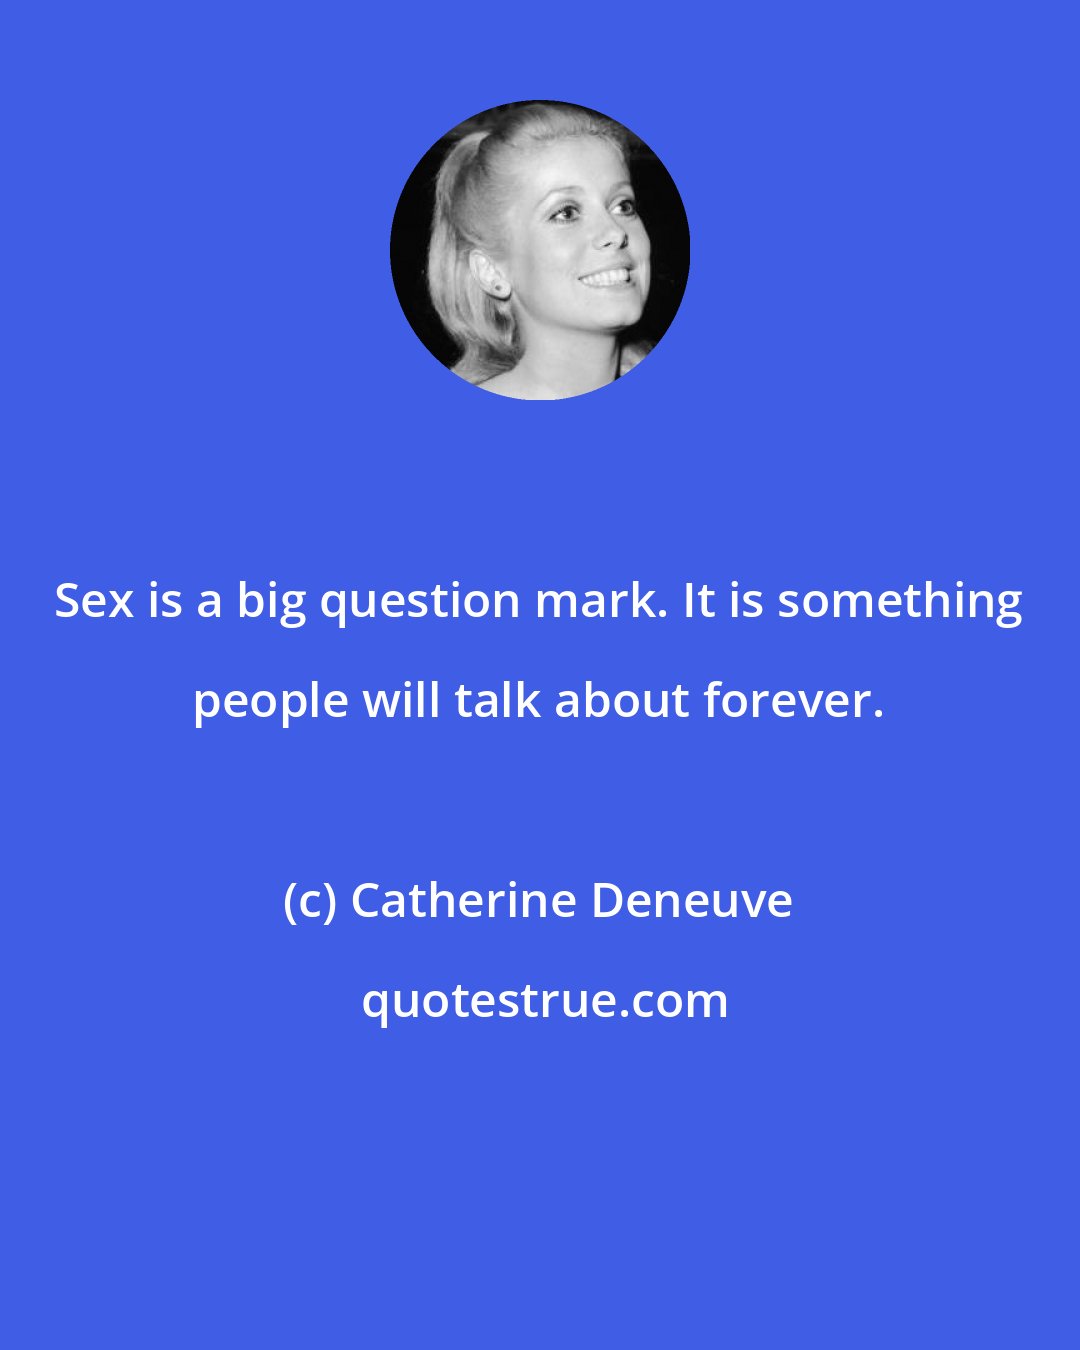 Catherine Deneuve: Sex is a big question mark. It is something people will talk about forever.